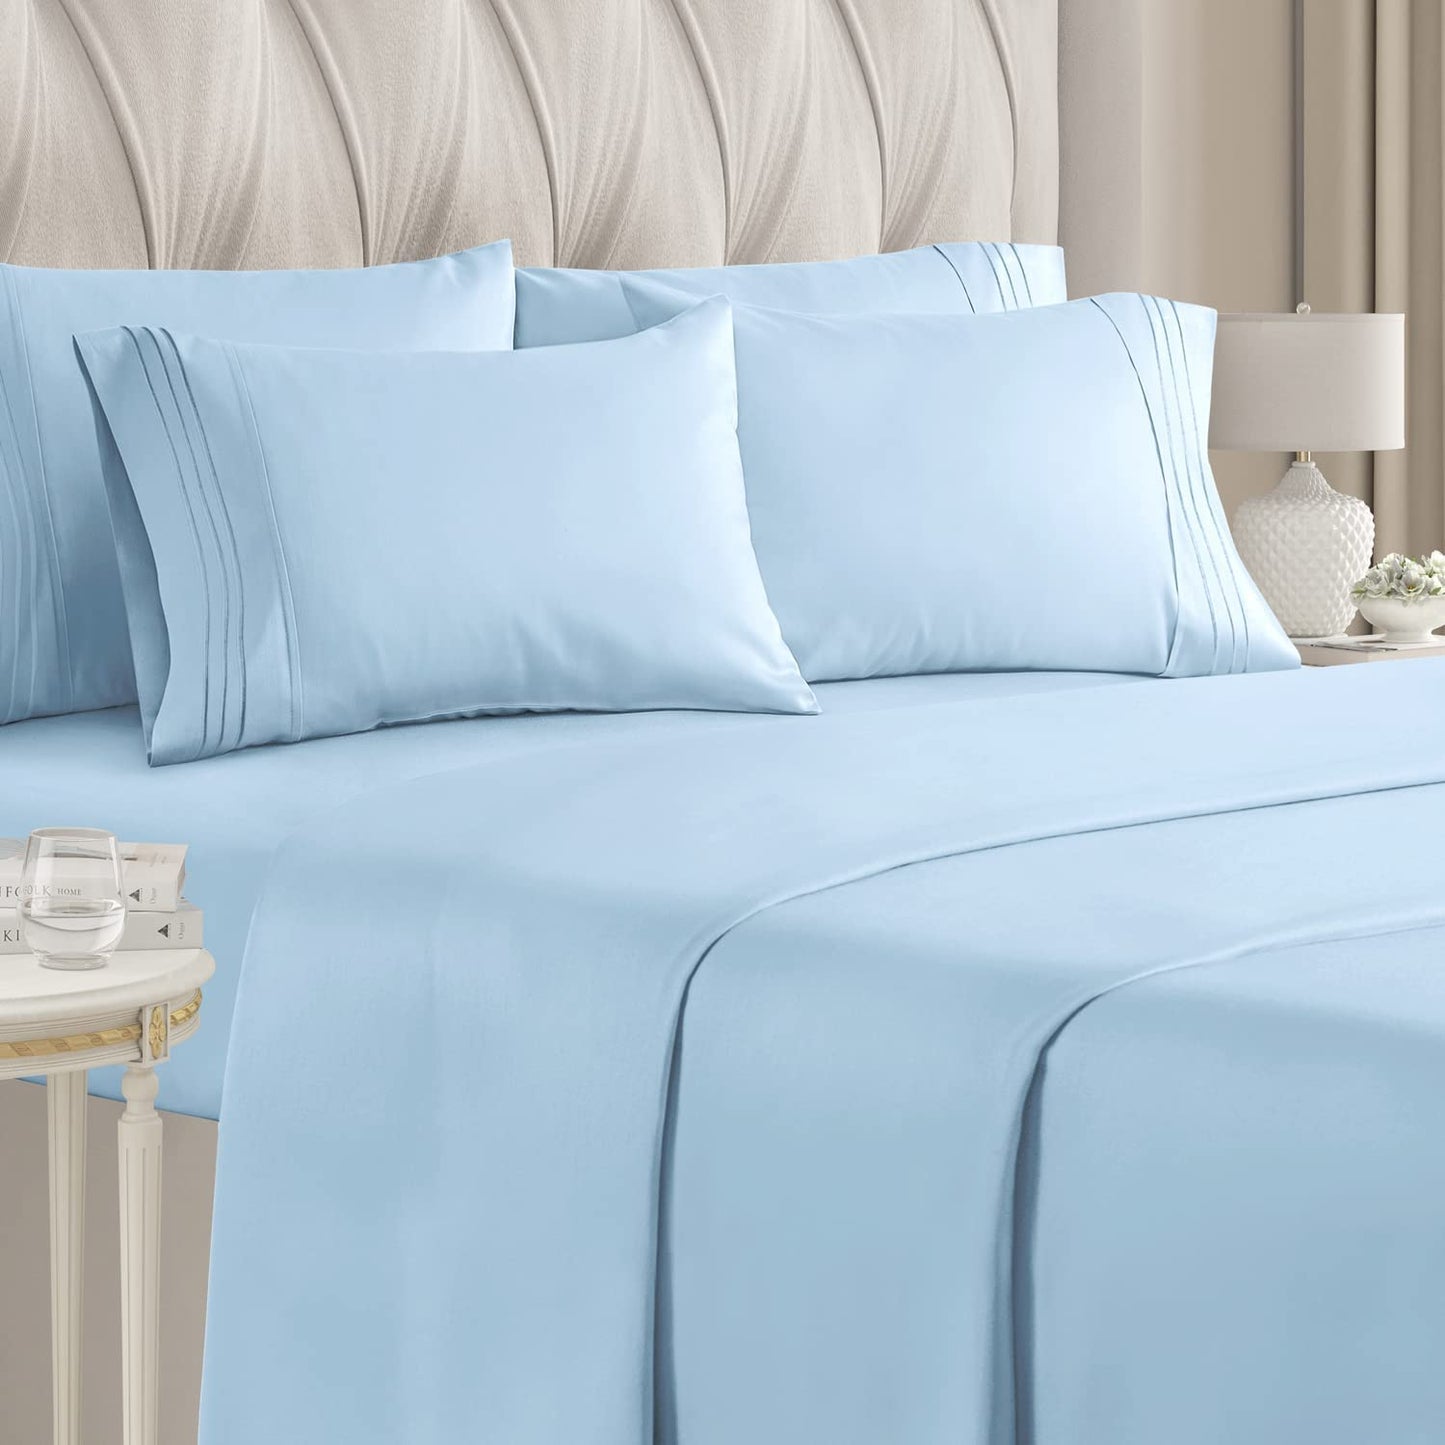 Buy Egyptian Cotton 1200 Thread Count Luxury Sheet Set Blue at EgyptianHomeLinens.com